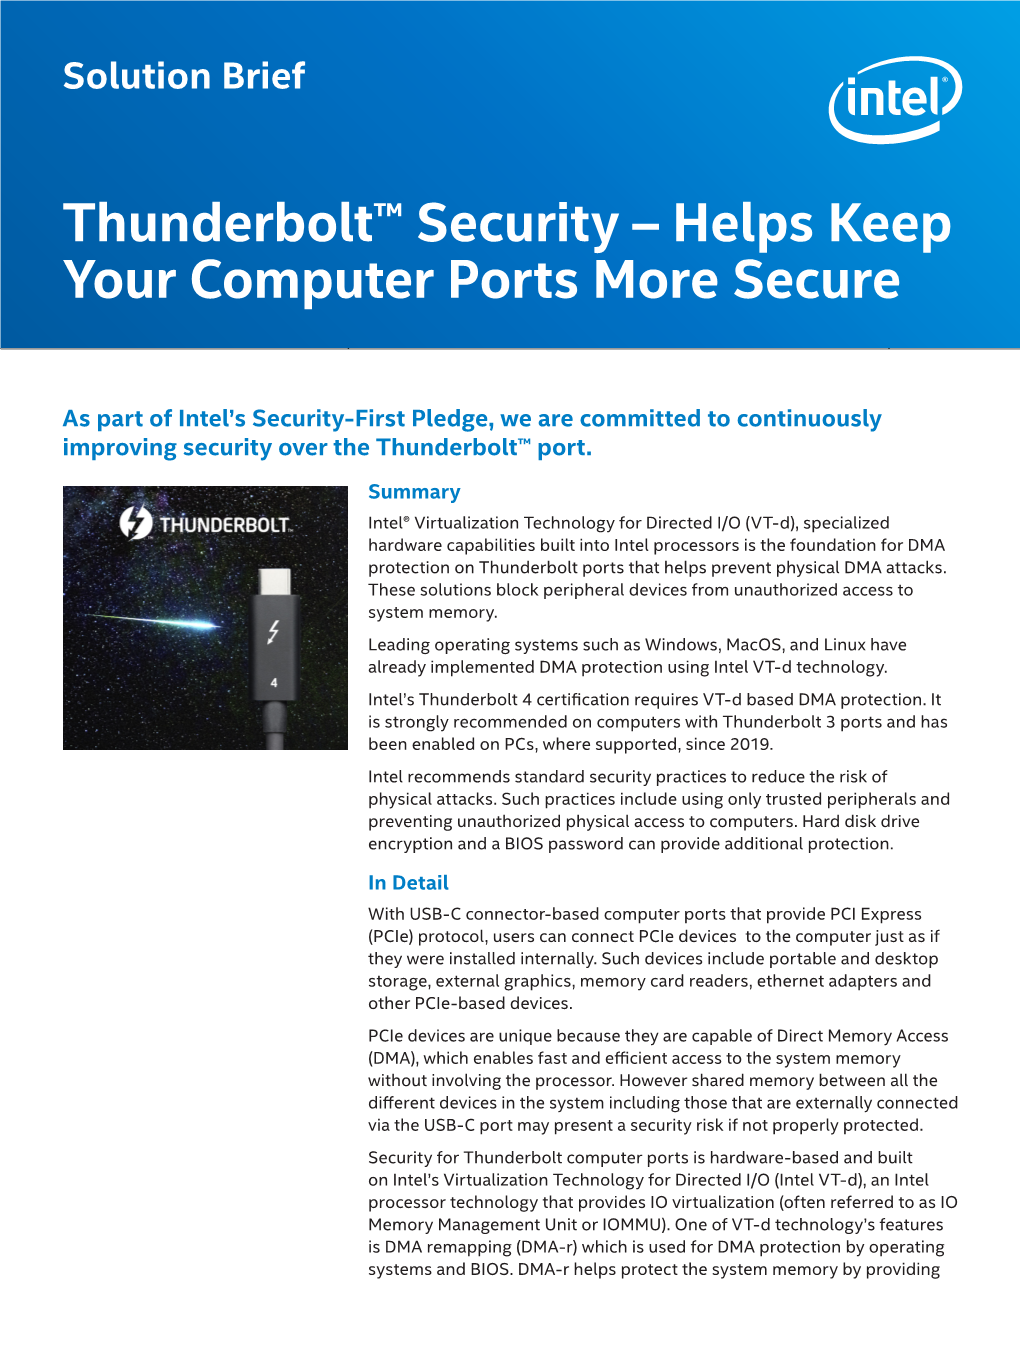 Thunderbolt™ Security – Helps Keep Your Computer Ports More Secure